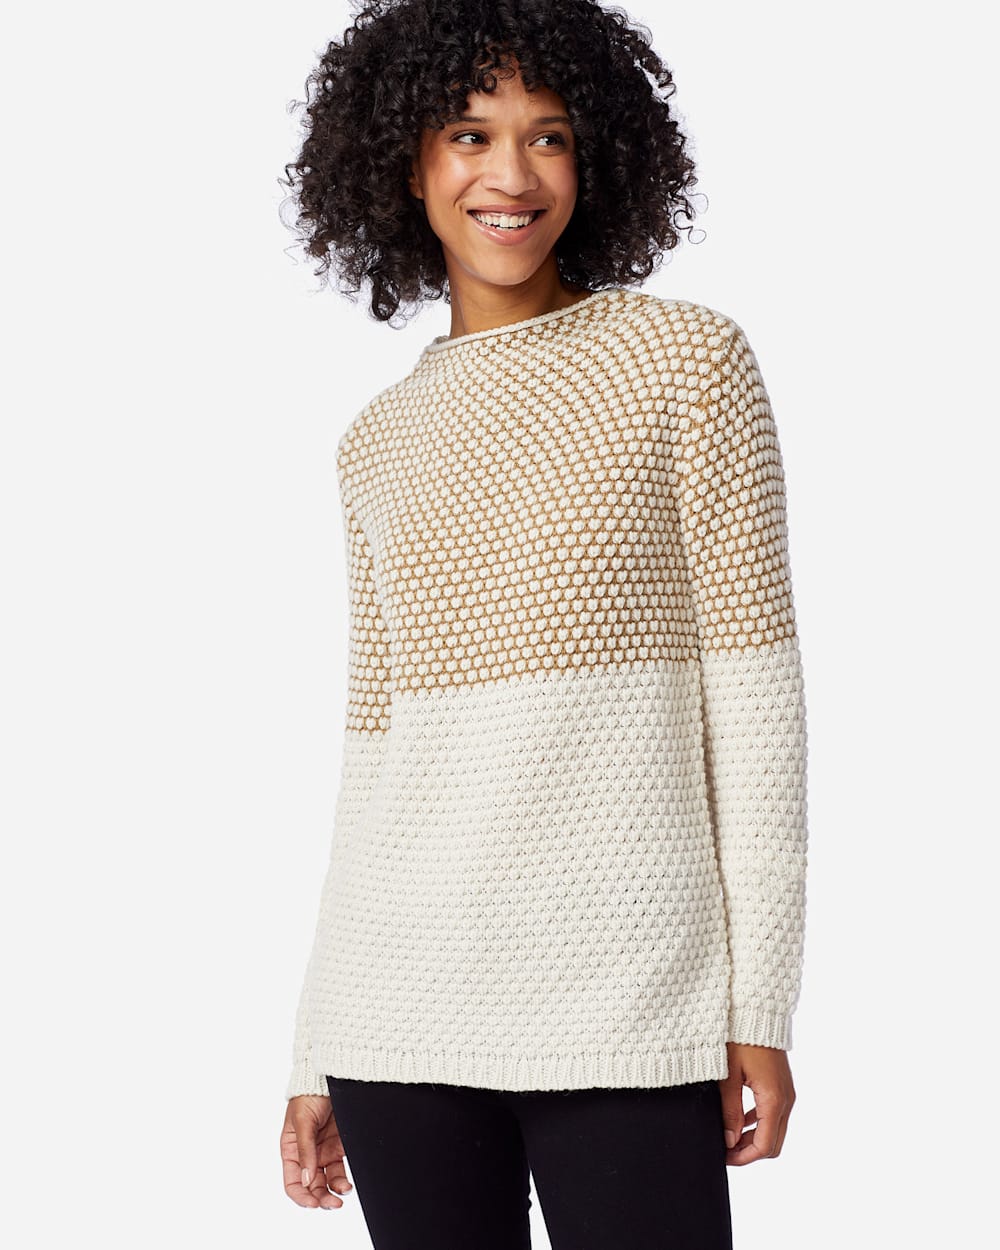 WOMEN'S TEXTURED FUNNEL NECK PULLOVER IN CAMEL/ANTIQUE WHITE image number 1